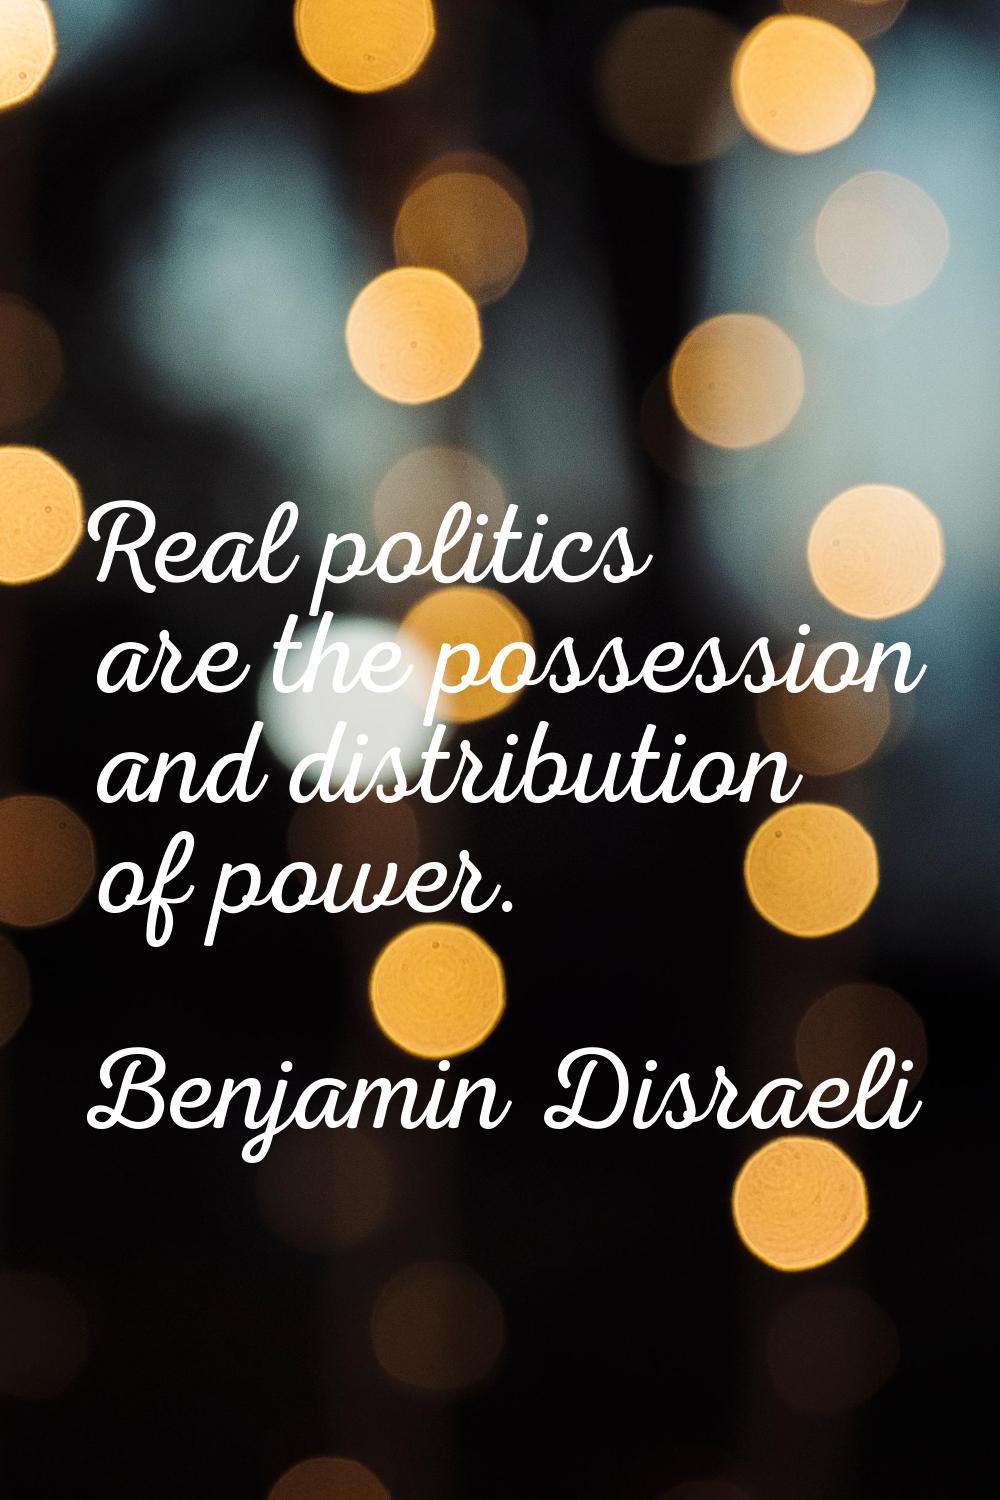 Real politics are the possession and distribution of power.